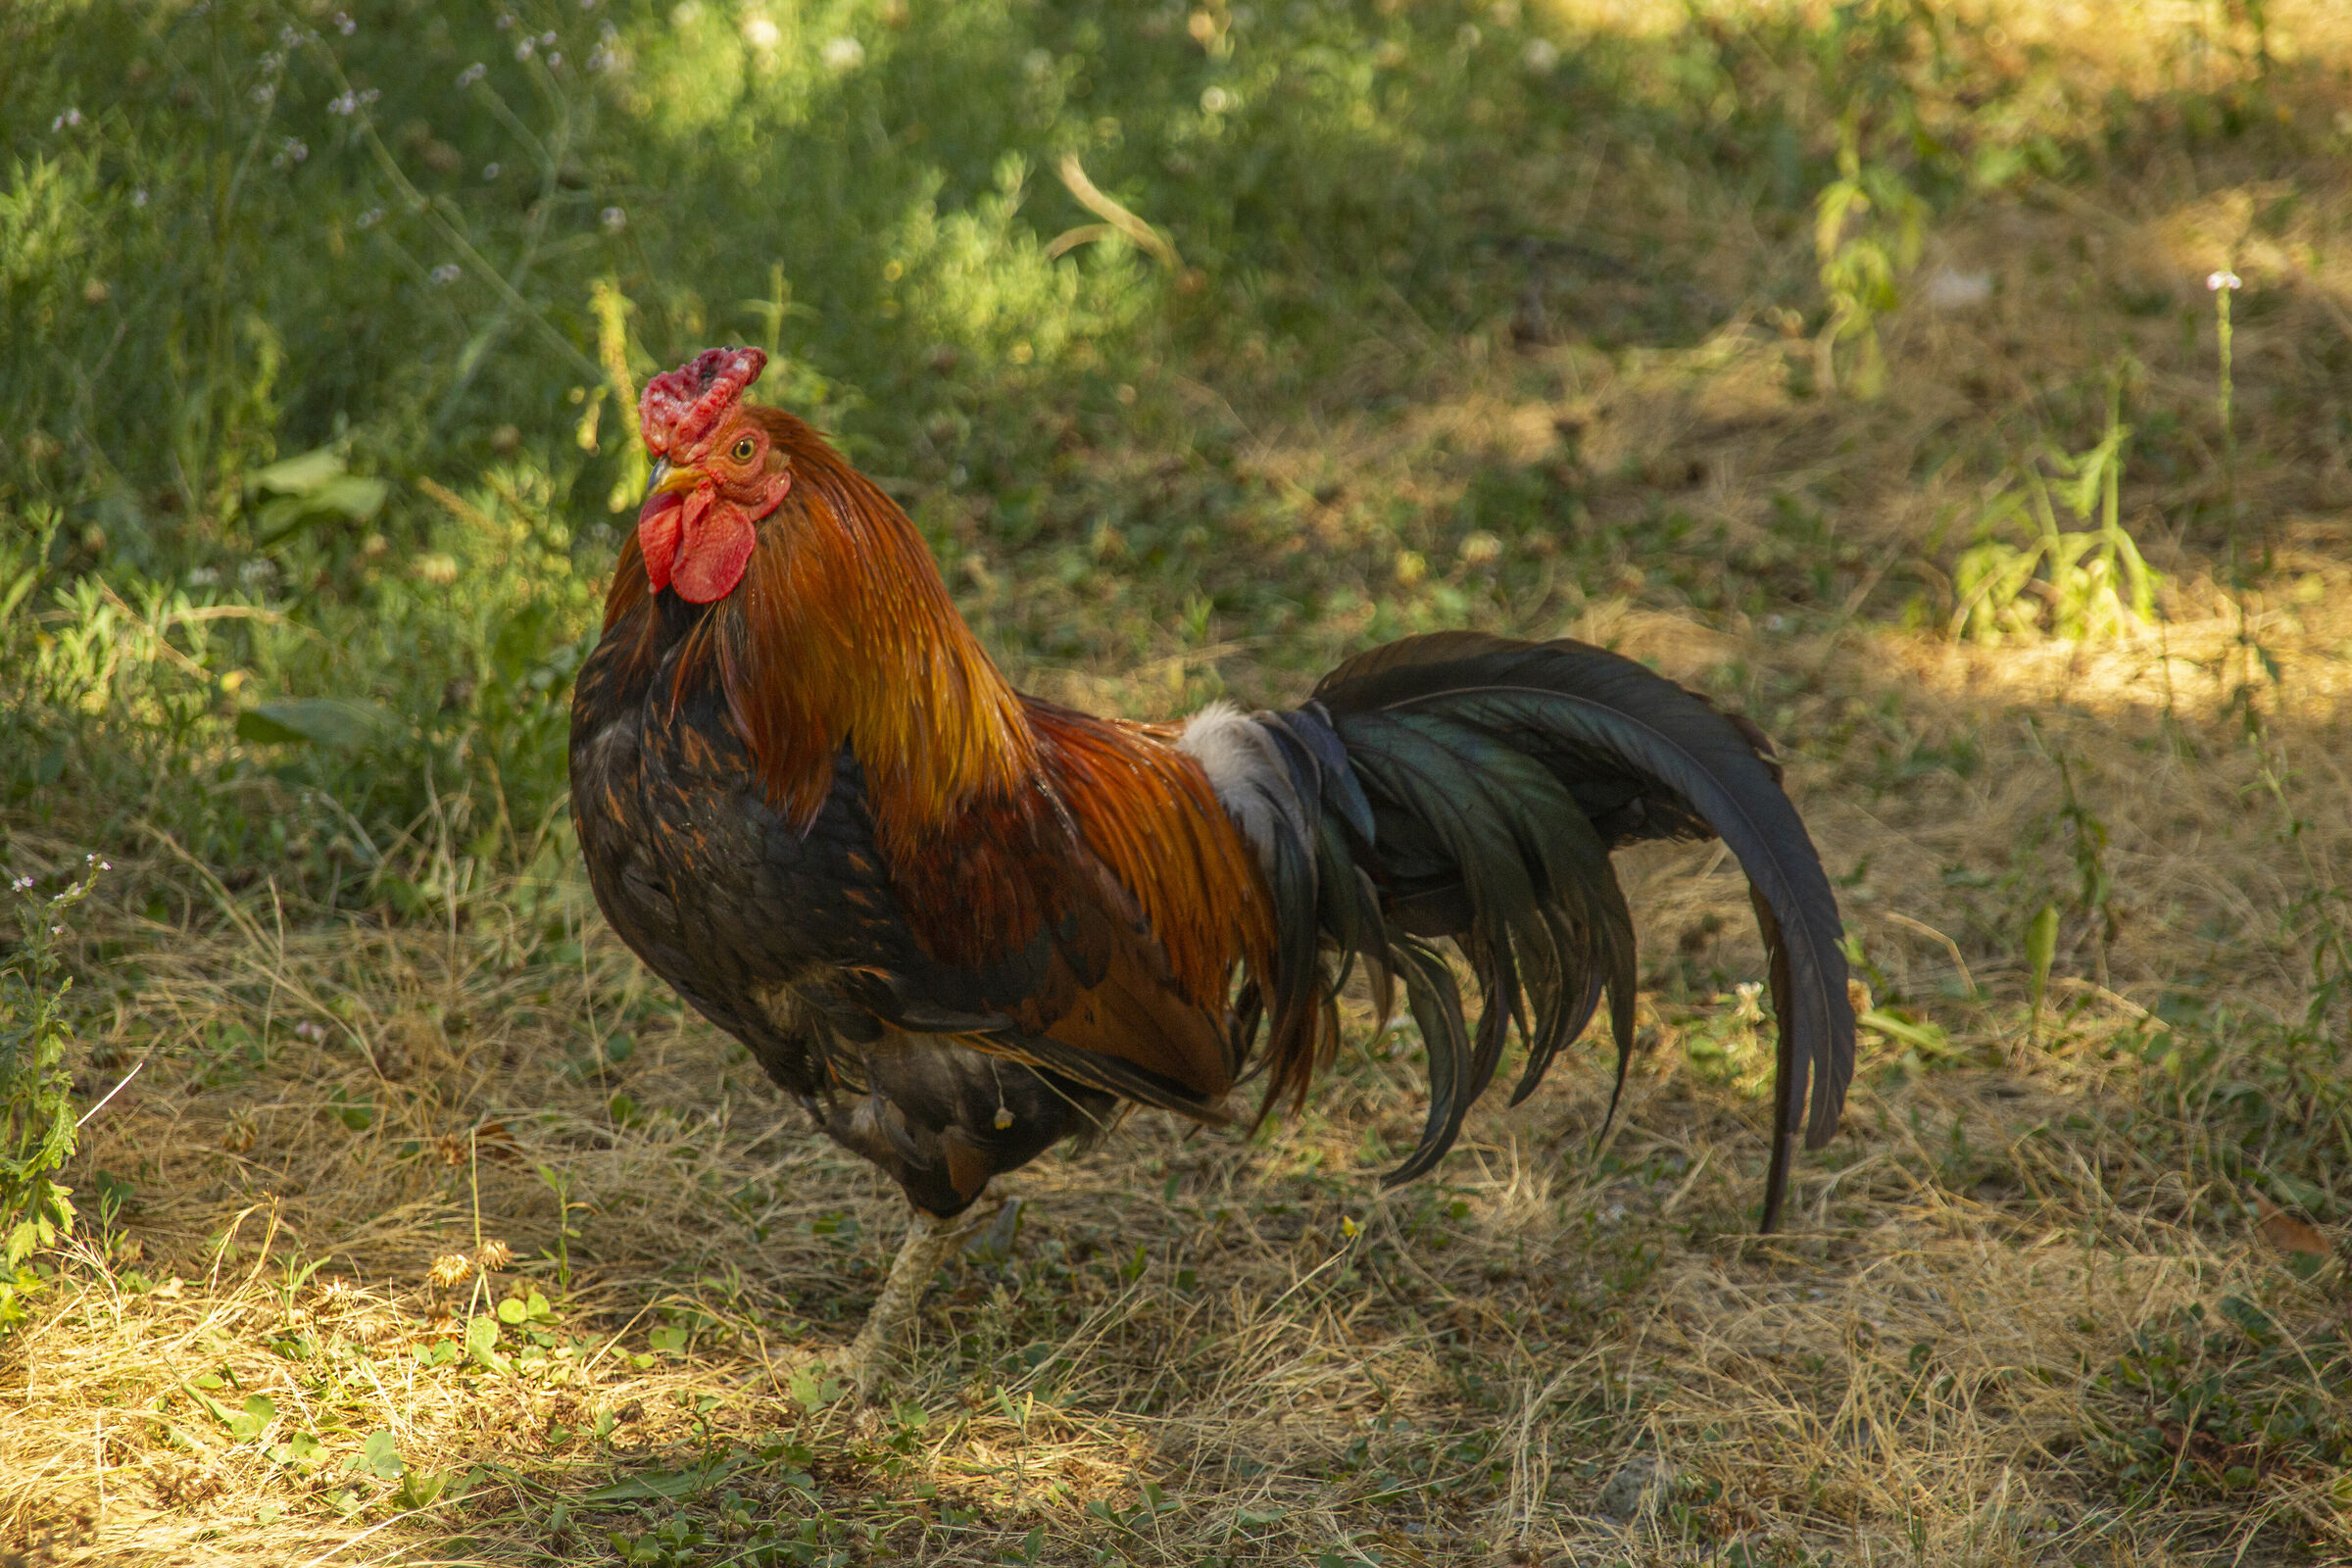 A proud rooster...